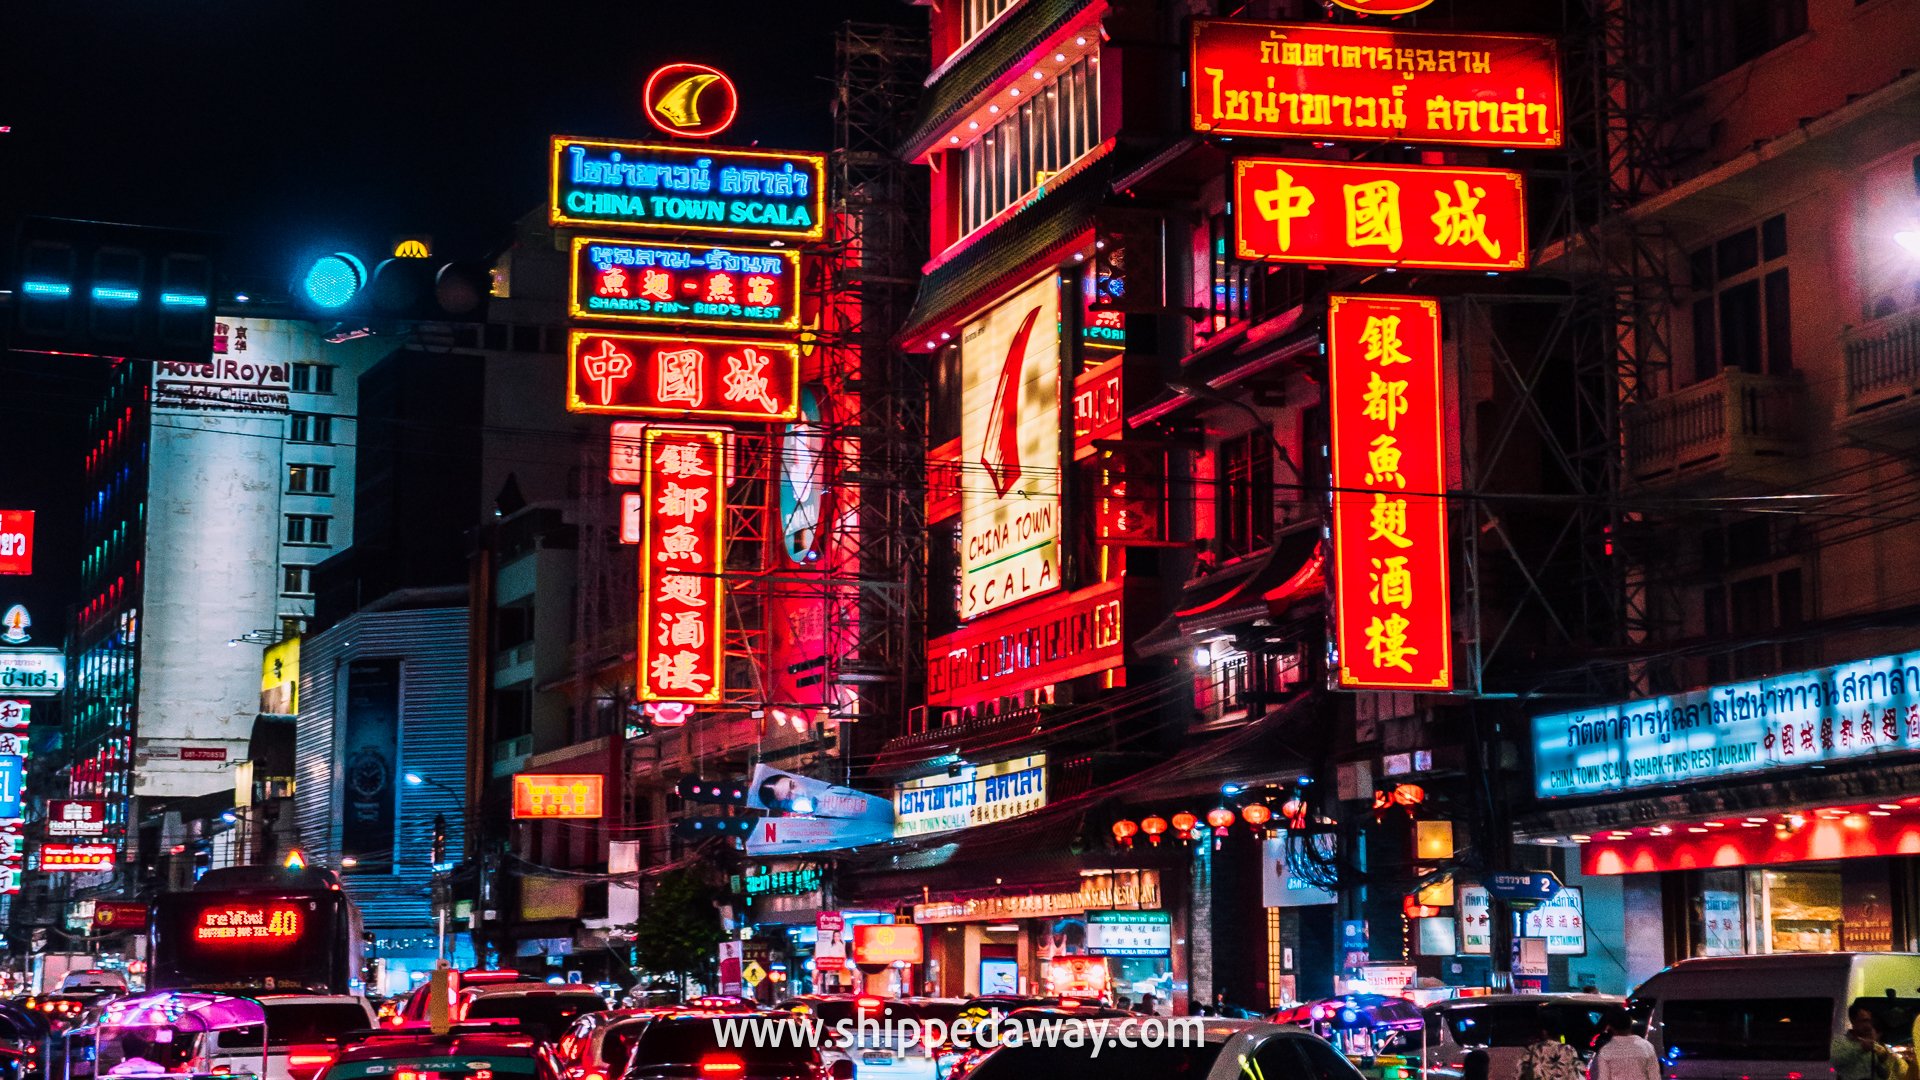 Top things to do in Bangkok Chinatown, Chinatown Travel Guide, best places to see in Bangkok's Chinatown, Bangkok Chinatown by night, Bangkok Chinatown best food, bangkok chinatown tips, all you need to know before visiting bangkok's chinatown